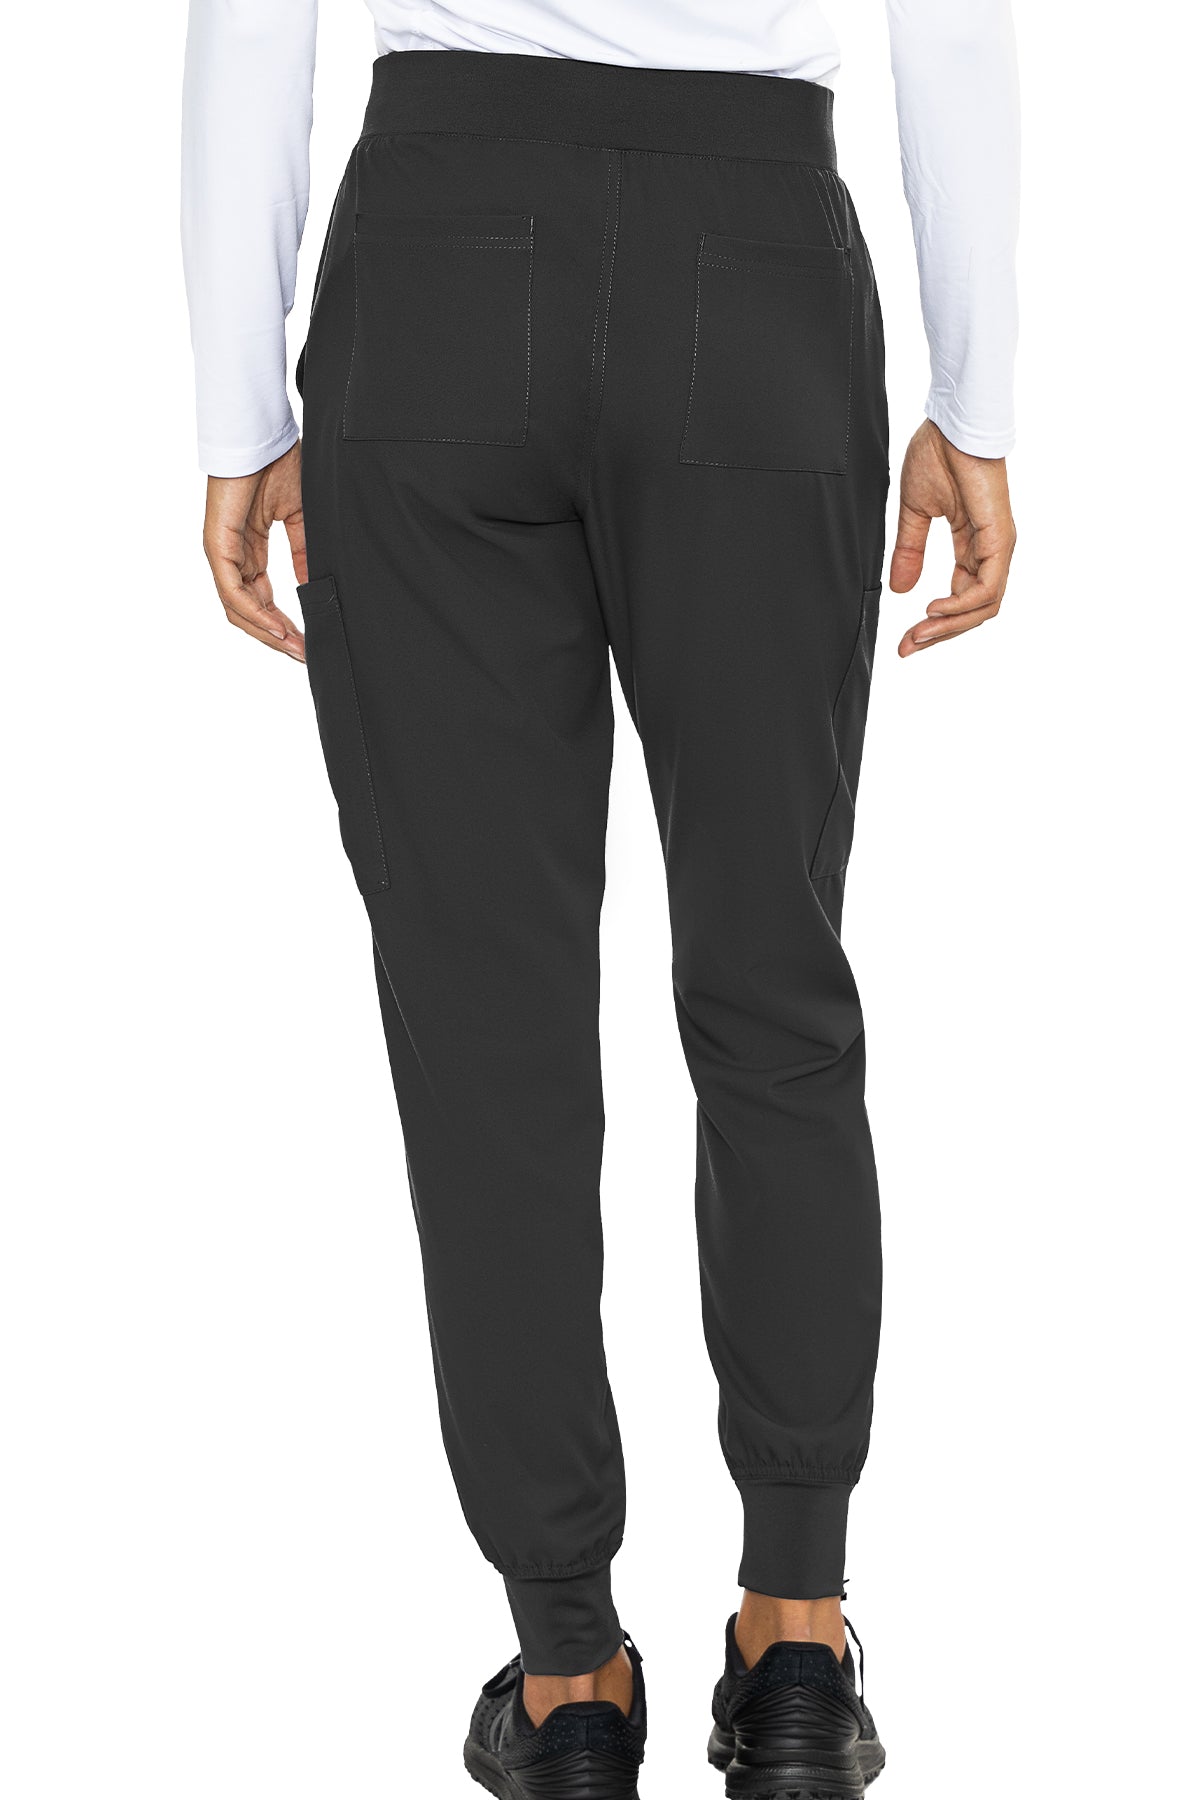 Med Couture 2711 Insight Jogger Pant Bl;ack